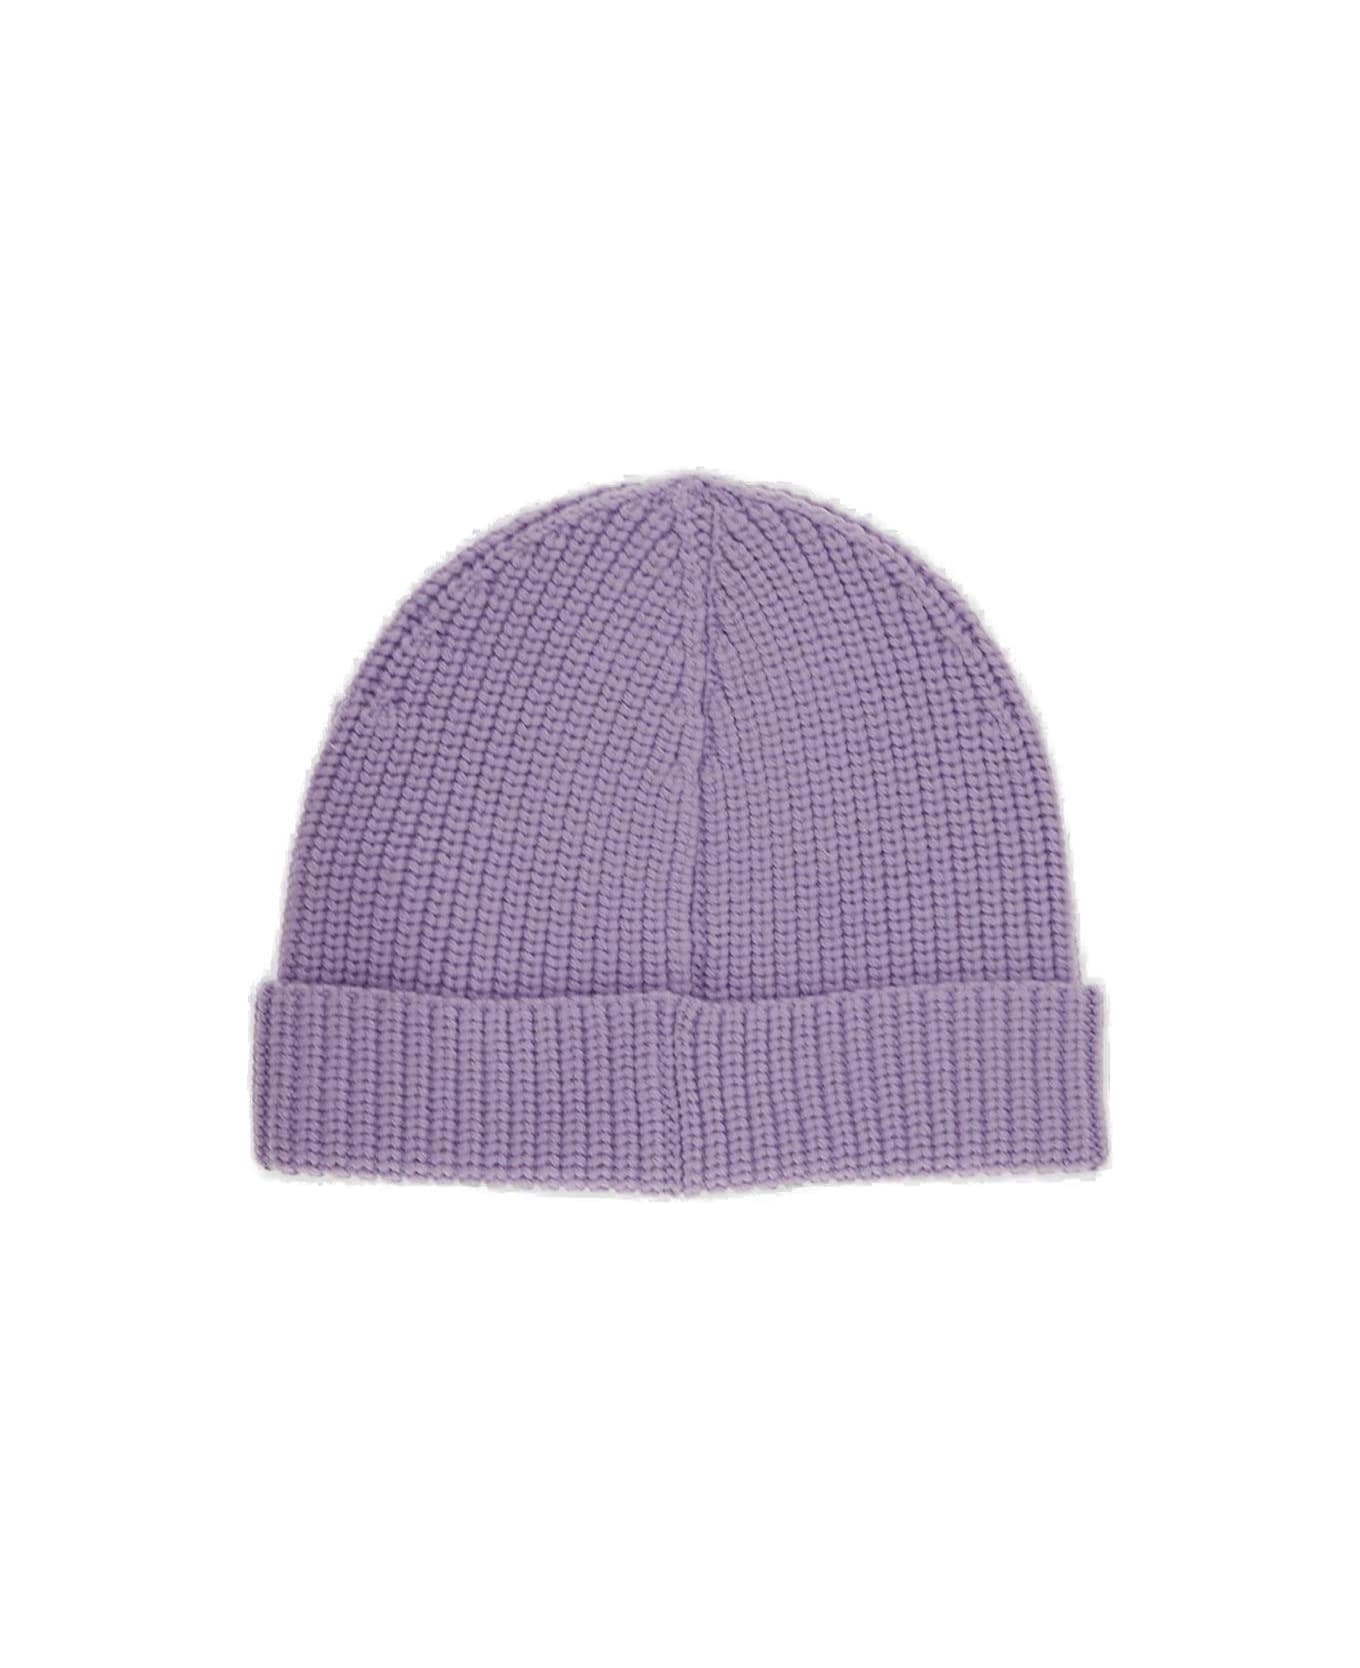 Off-White Off-stamp Logo Embroidered Beanie - LILAC WHITE